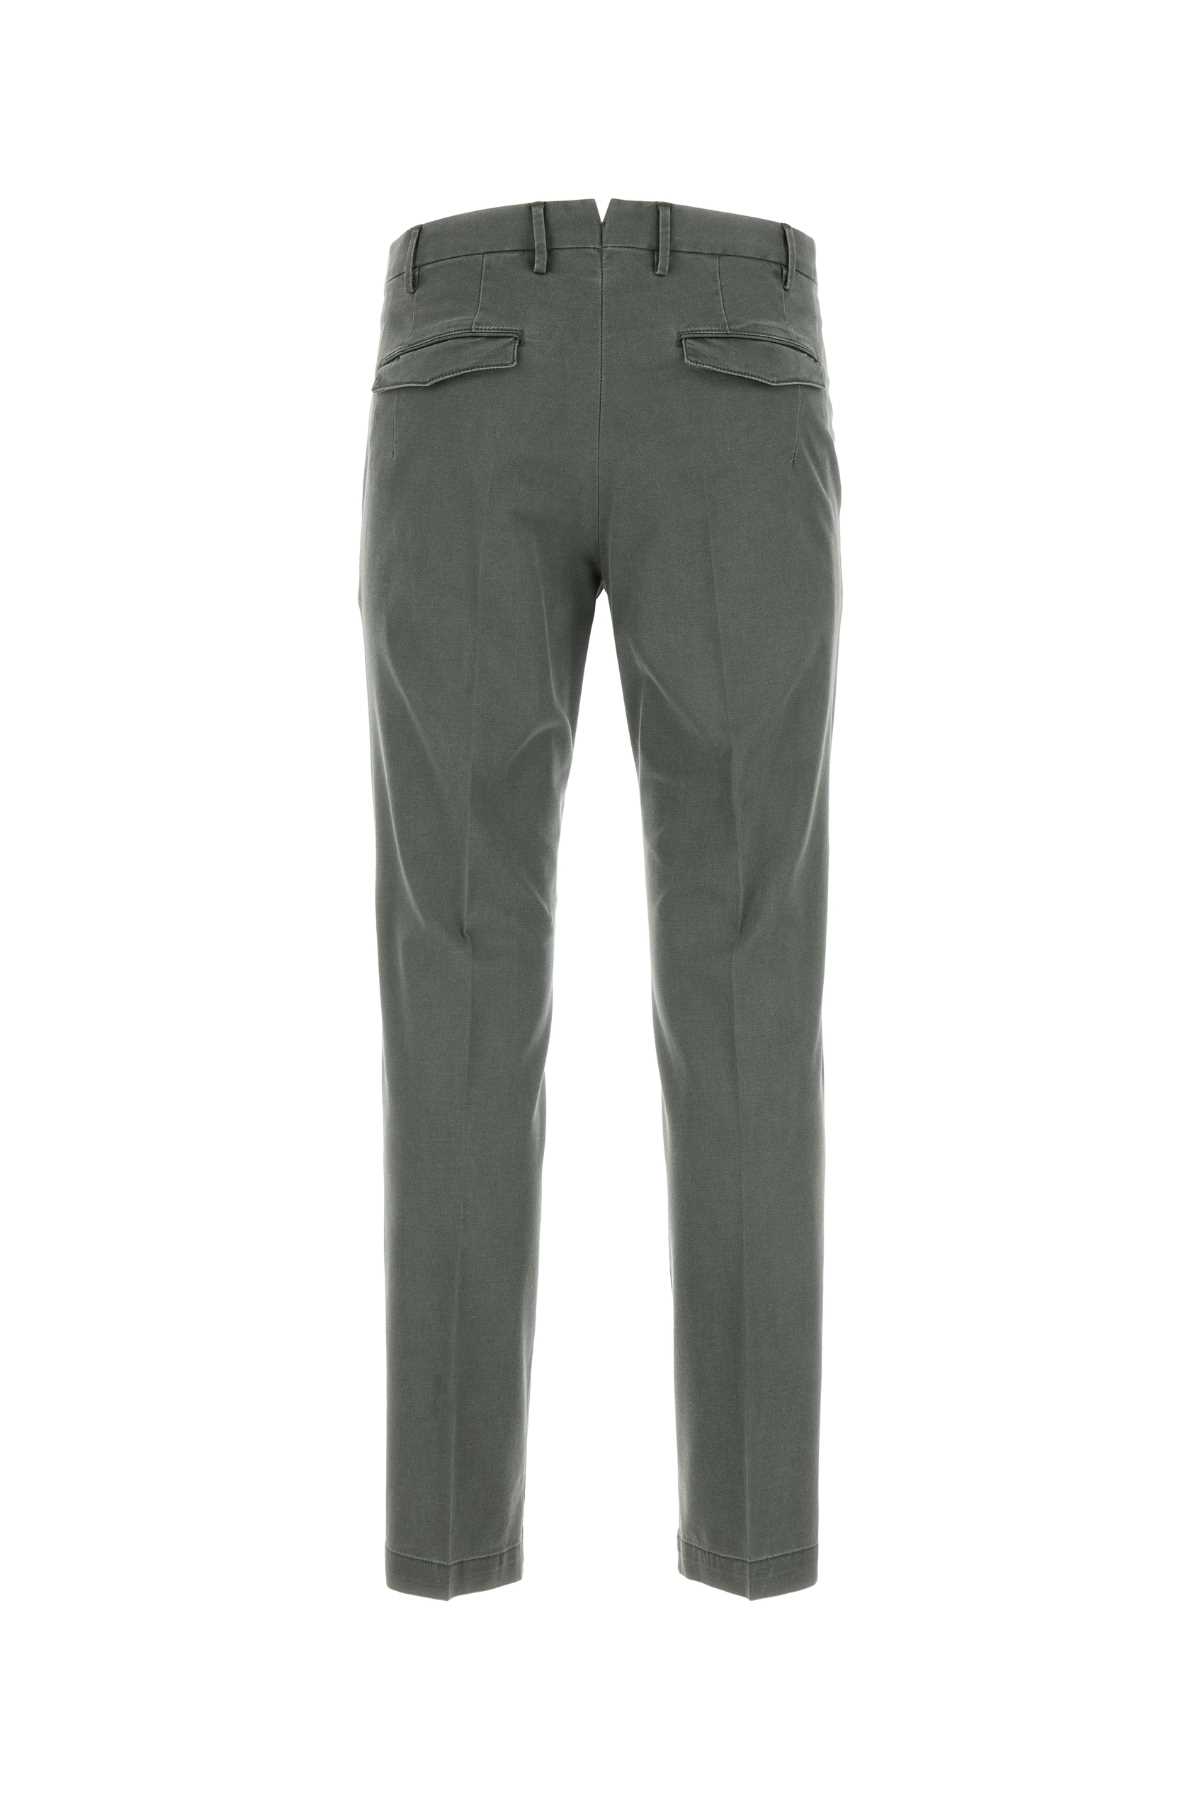 Pt01 Grey Stretch Cotton Blend Pant In Verdemilitare